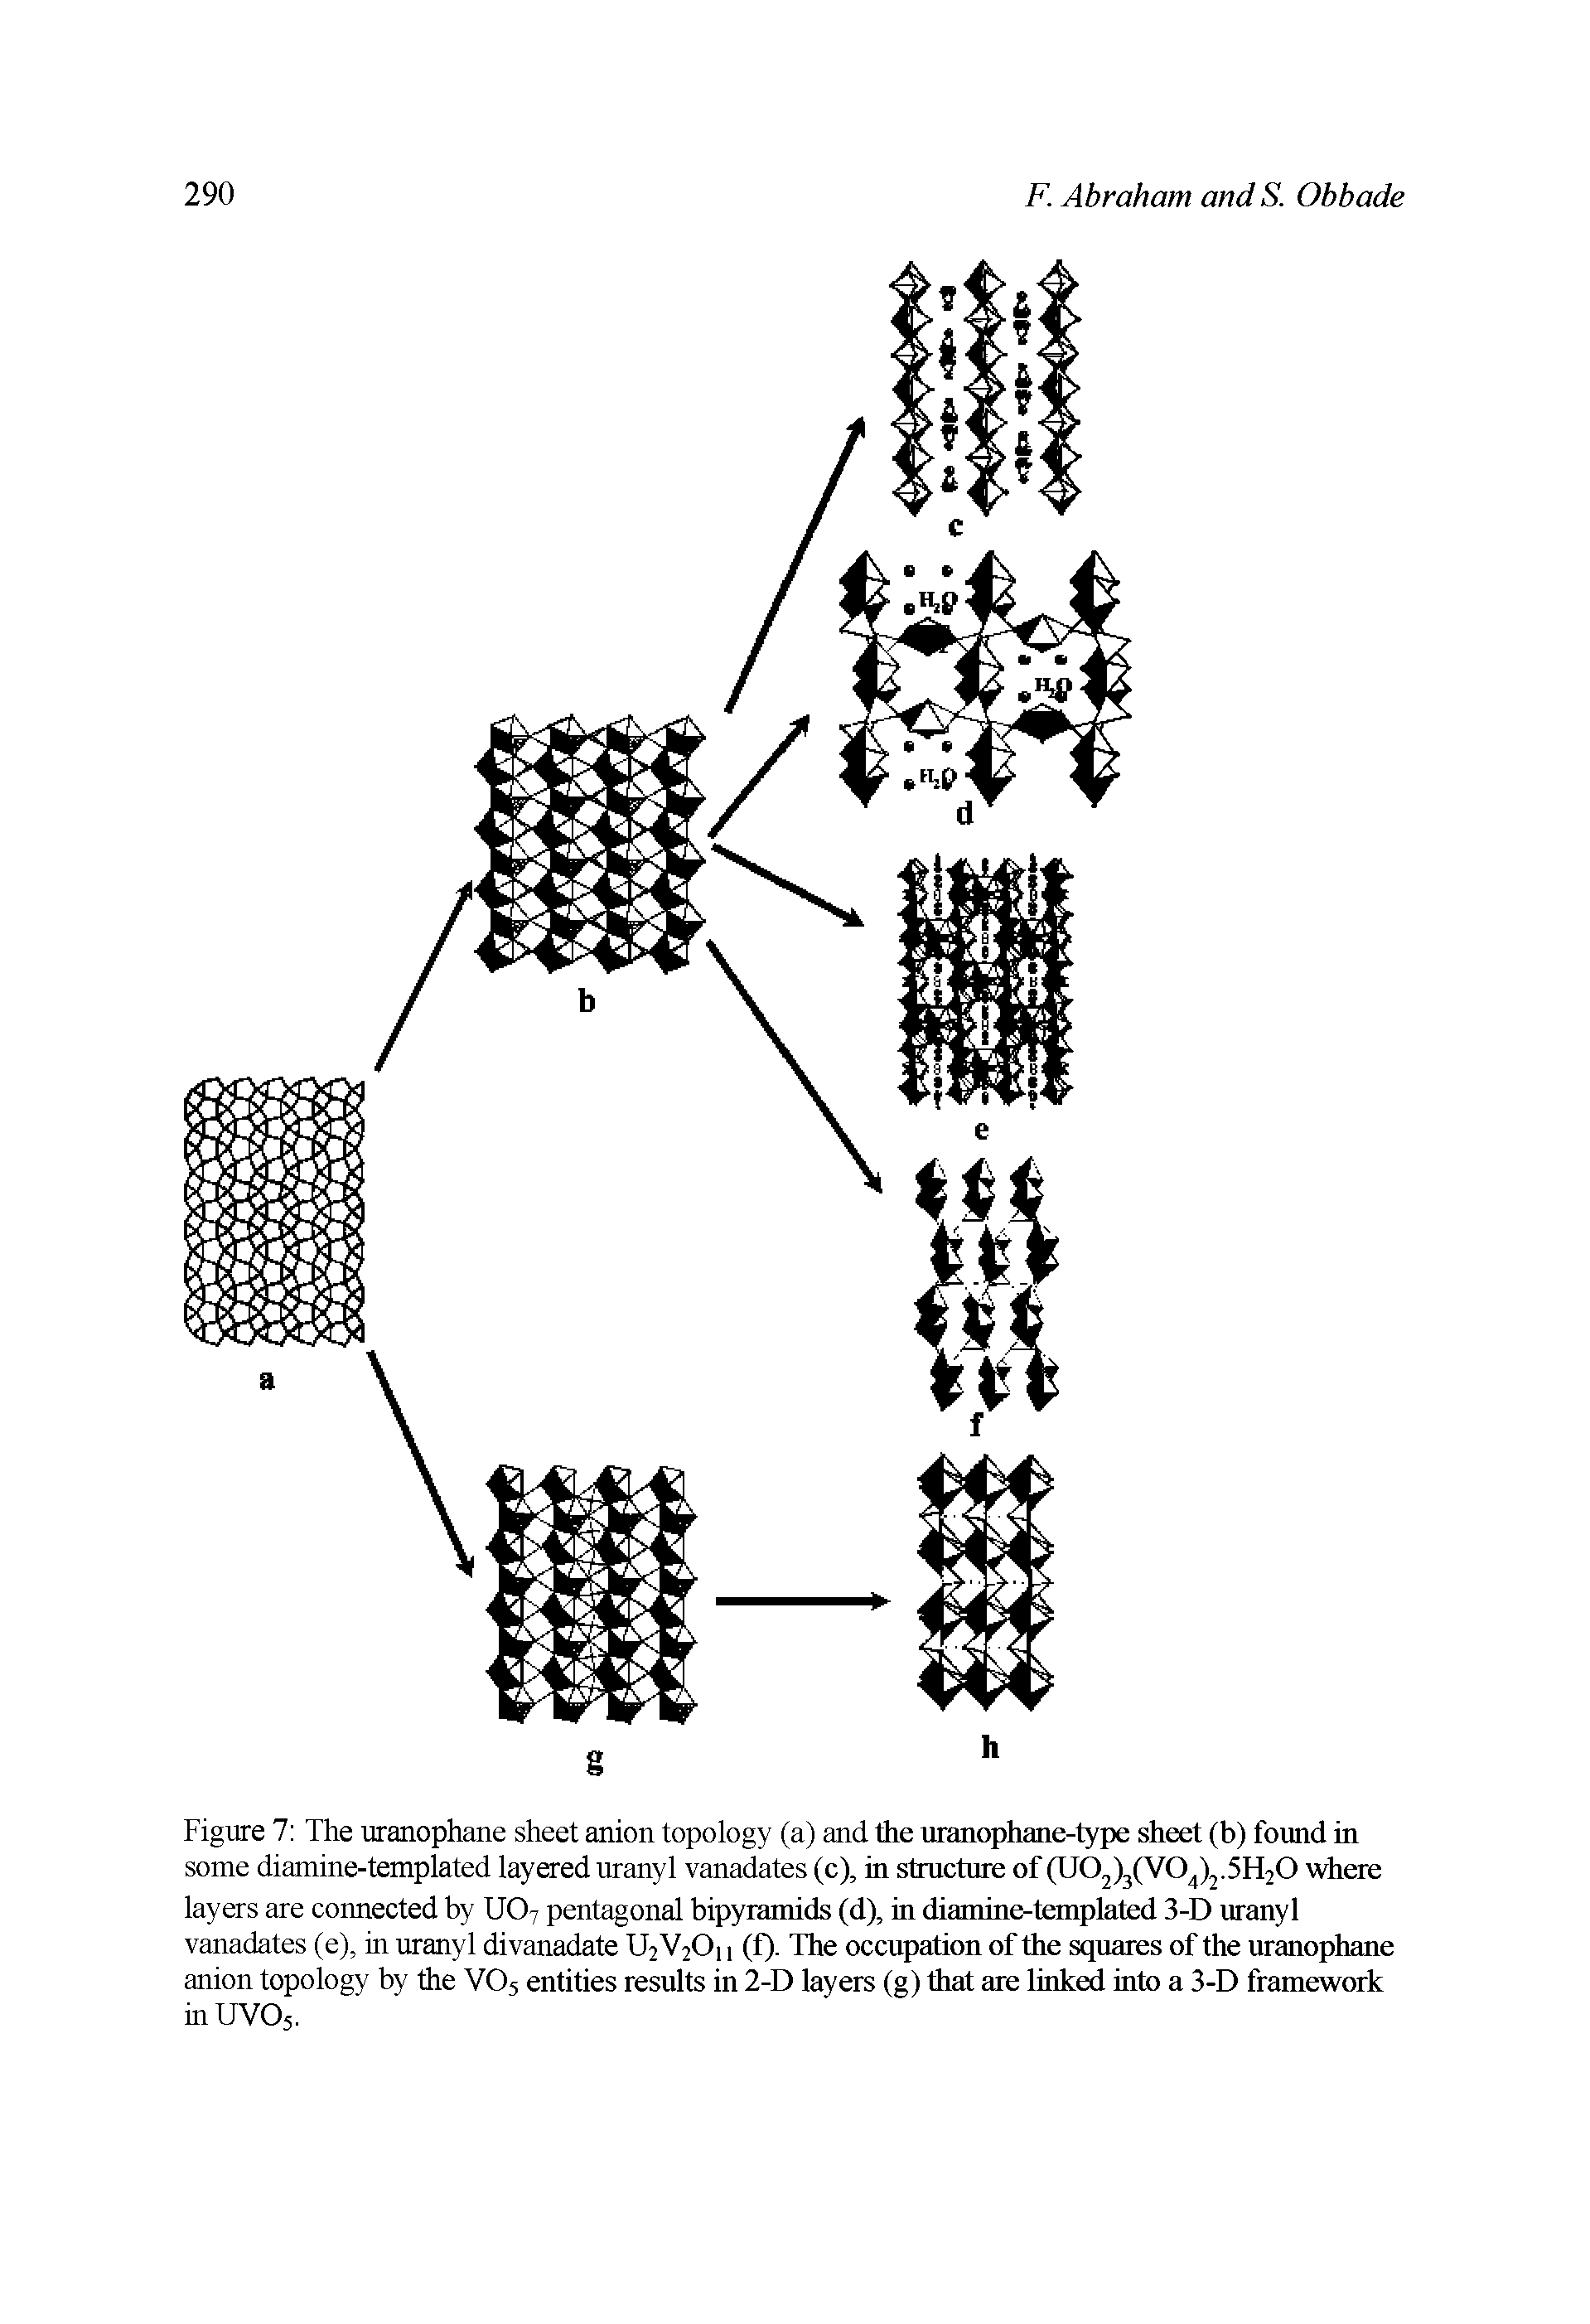 Figure 7 The uranophane sheet anion topology (a) and the uranophane-type sheet (b) found in some diamine-templated layered uranyl vanadates (c), in structure of (U02)3(V0 )2.5H20 where layers are connected by UO7 pentagonal bipyramids (d), in diamine-templated 3-D uranyl vanadates (e), in uranyl divanadate U2V2O11 (f). The occupation of the sqnares of the uranophane anion topology by the VO5 entities results in 2-D layers (g) that are linked into a 3-D framework inUVOj.